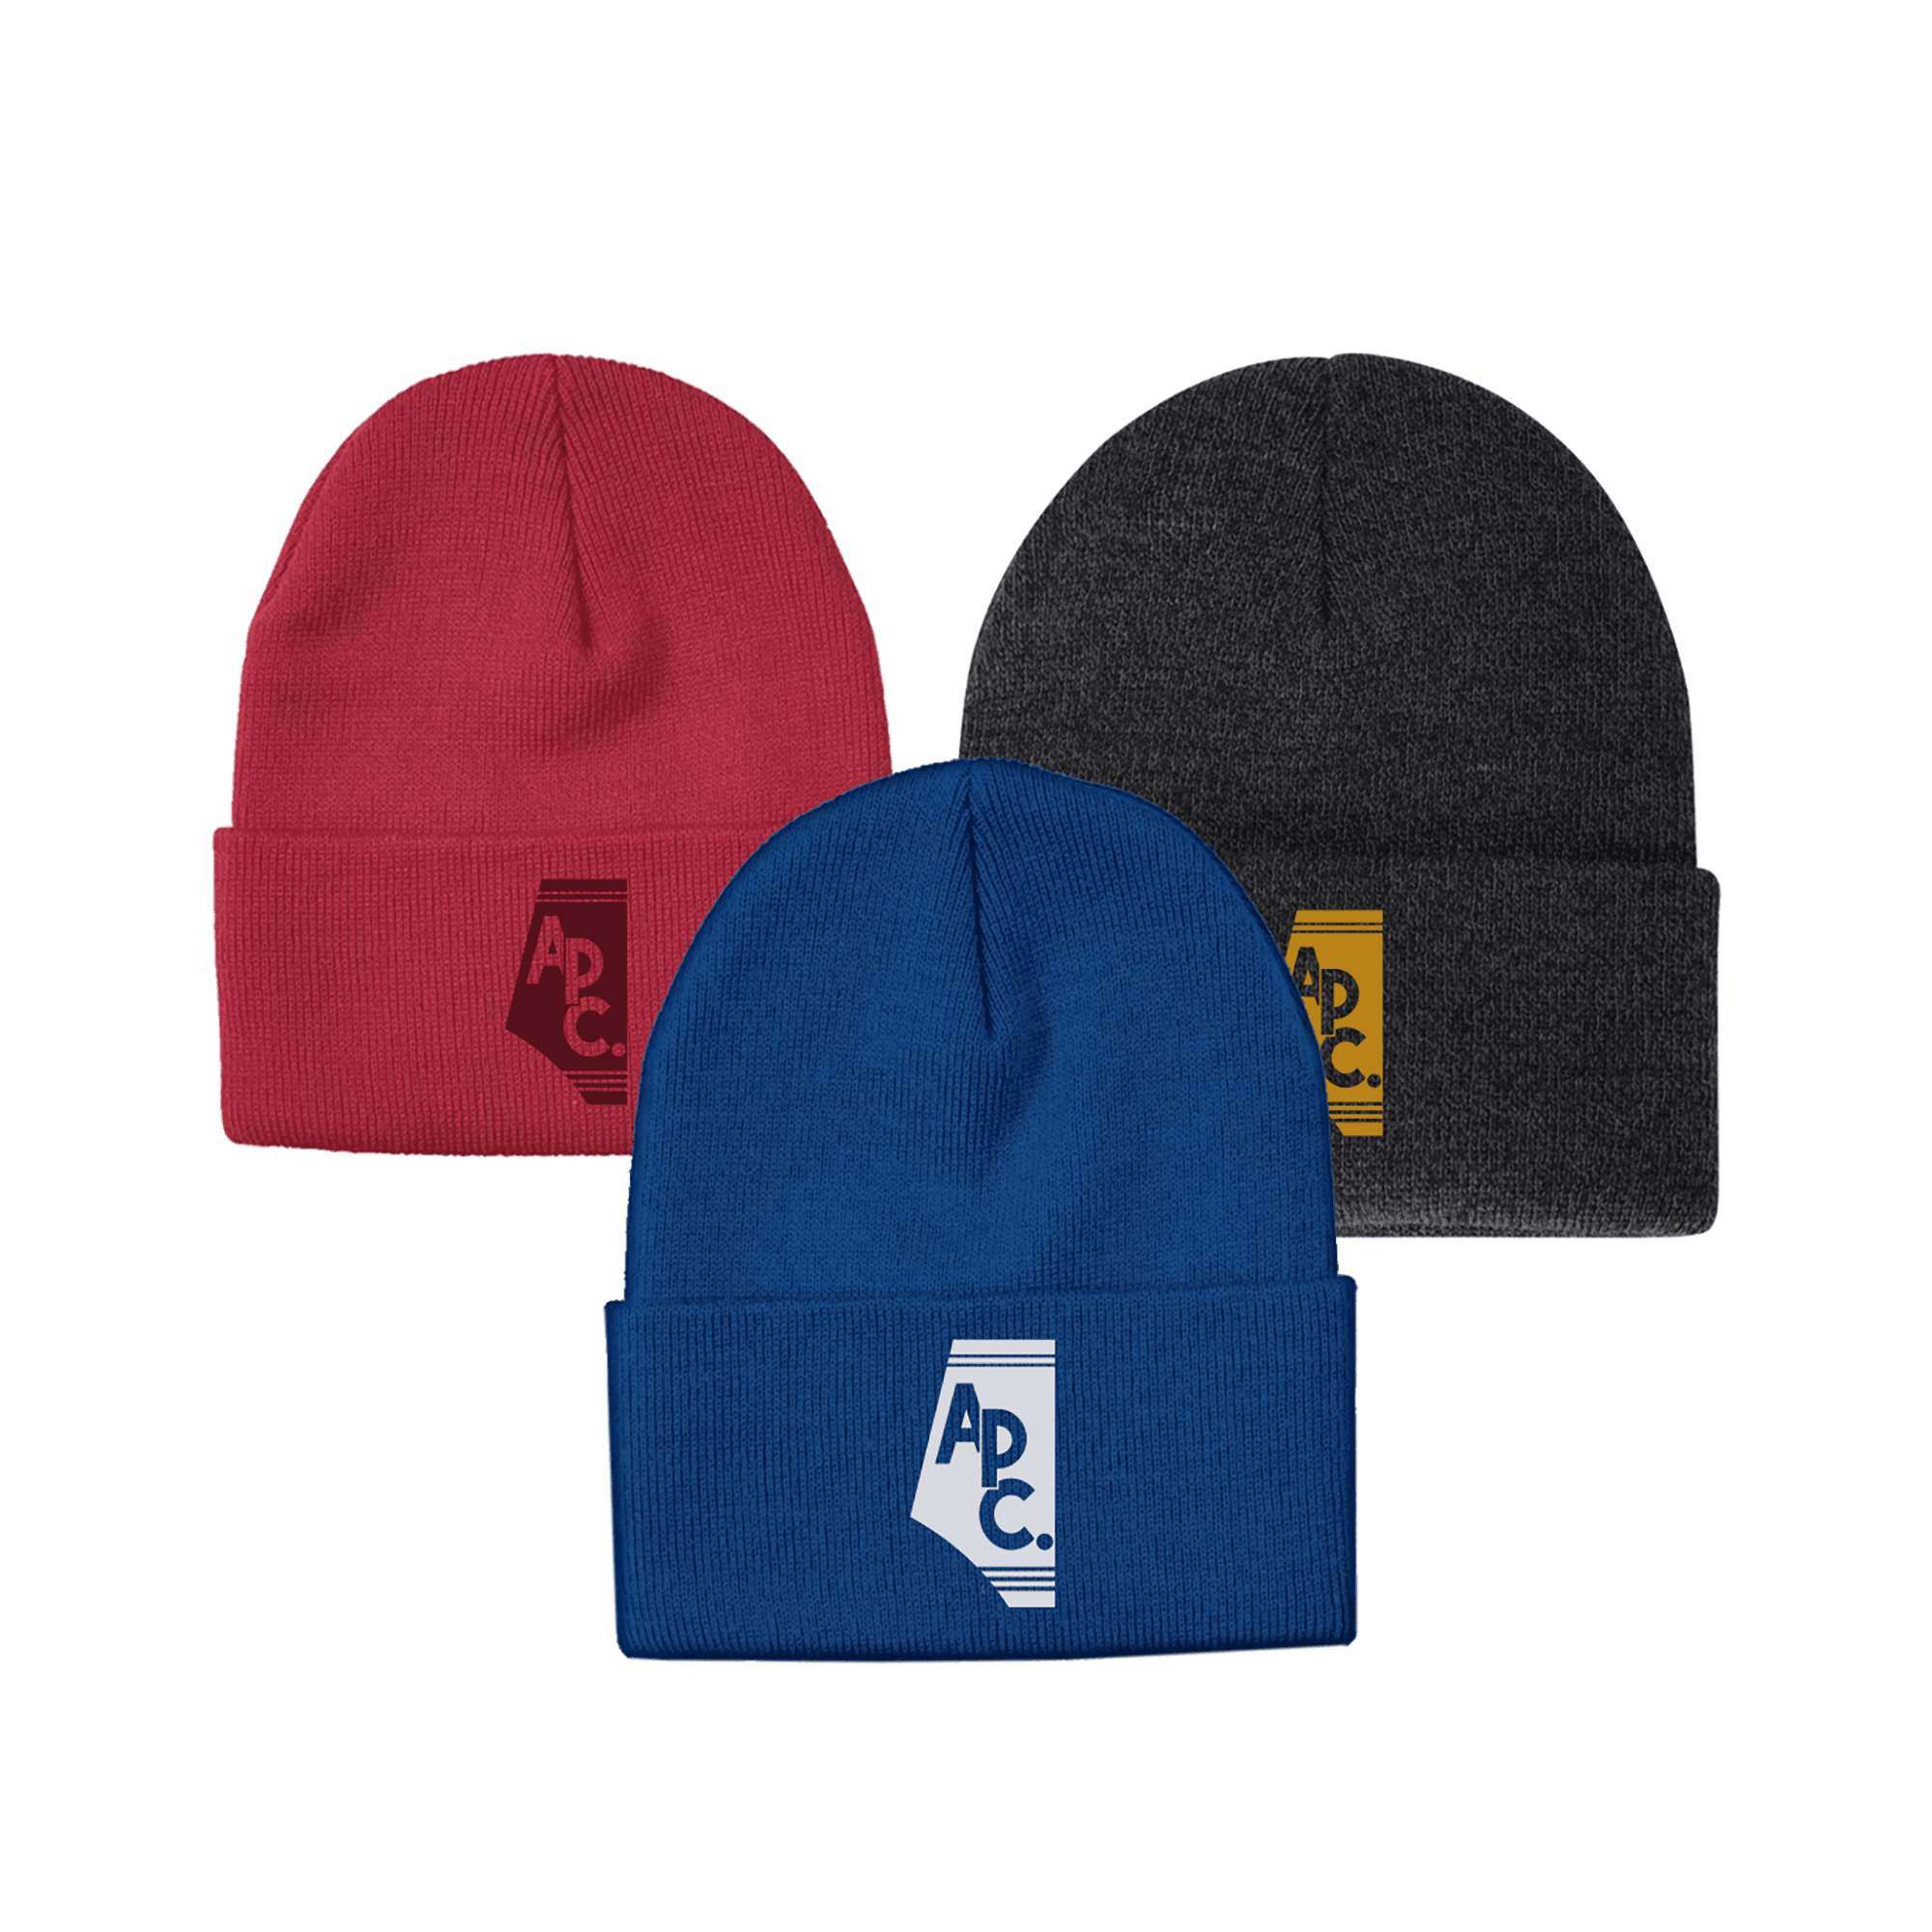 Embroidered Toques 